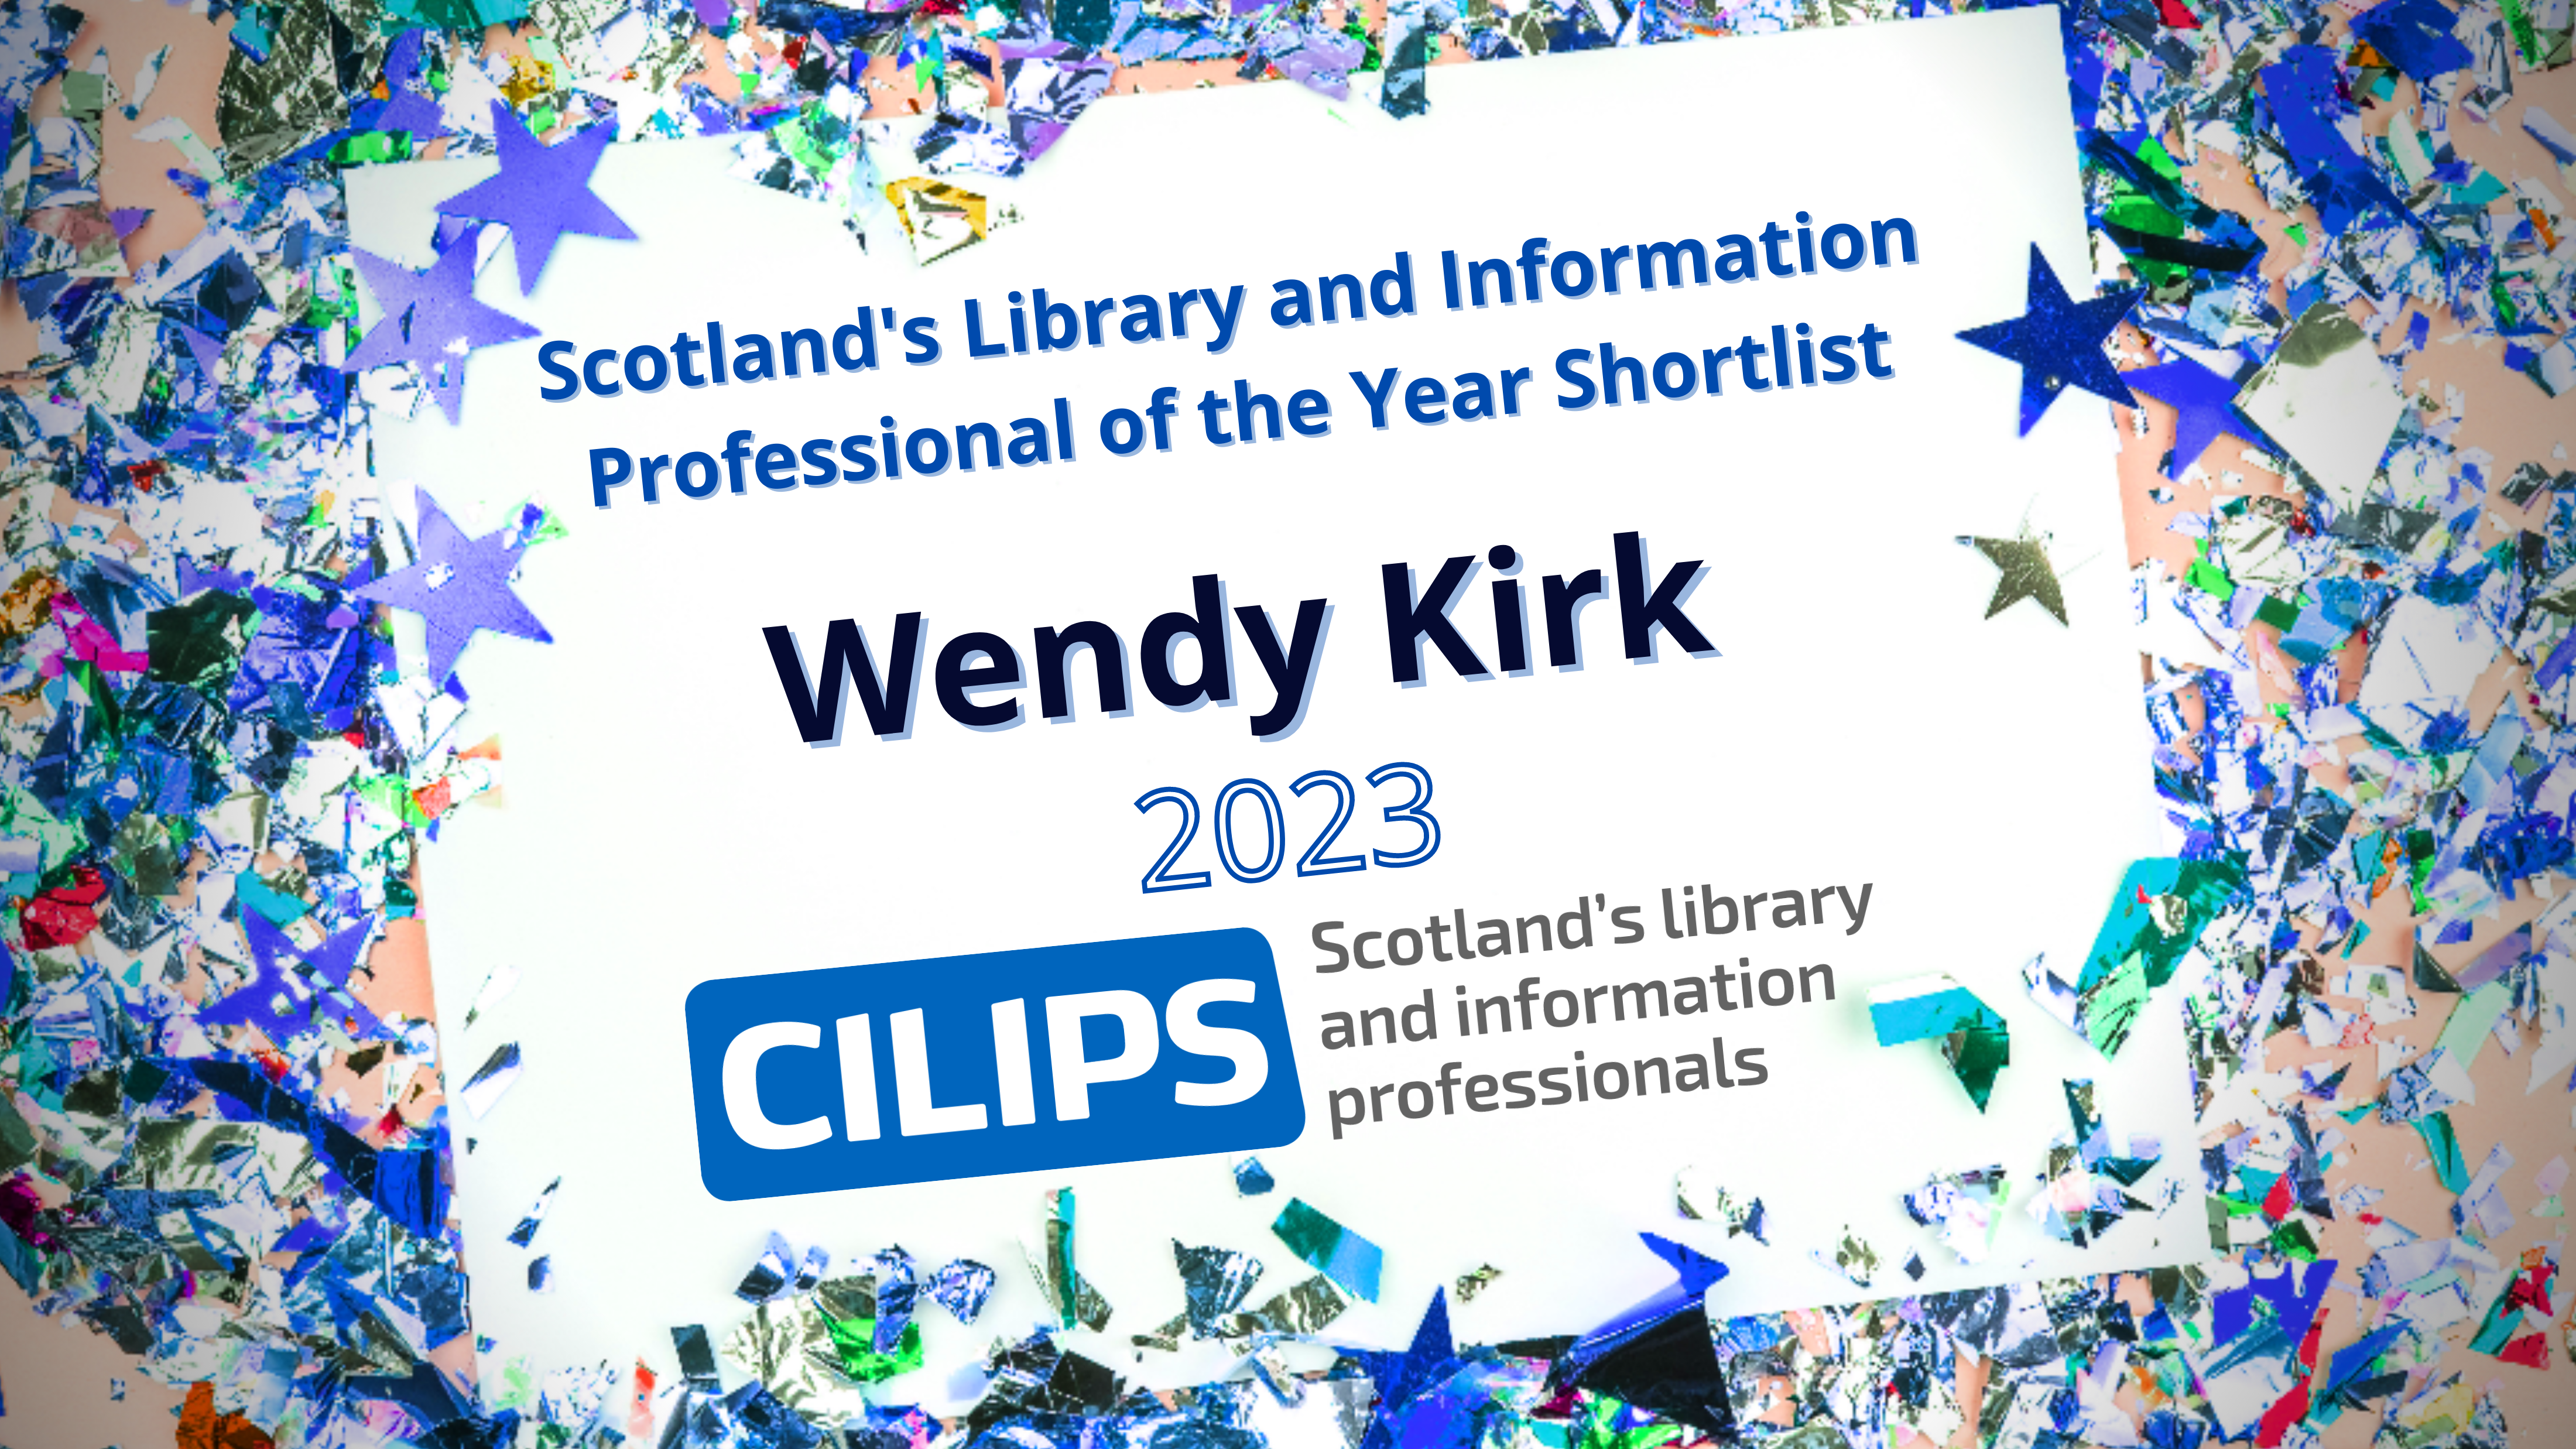 Scotland's library and Information Professional of the Year Shortlist. Wendy Kirk, 2023. CILIPS blue and grey logo. White paper background with mixed blue confetti around the outside.